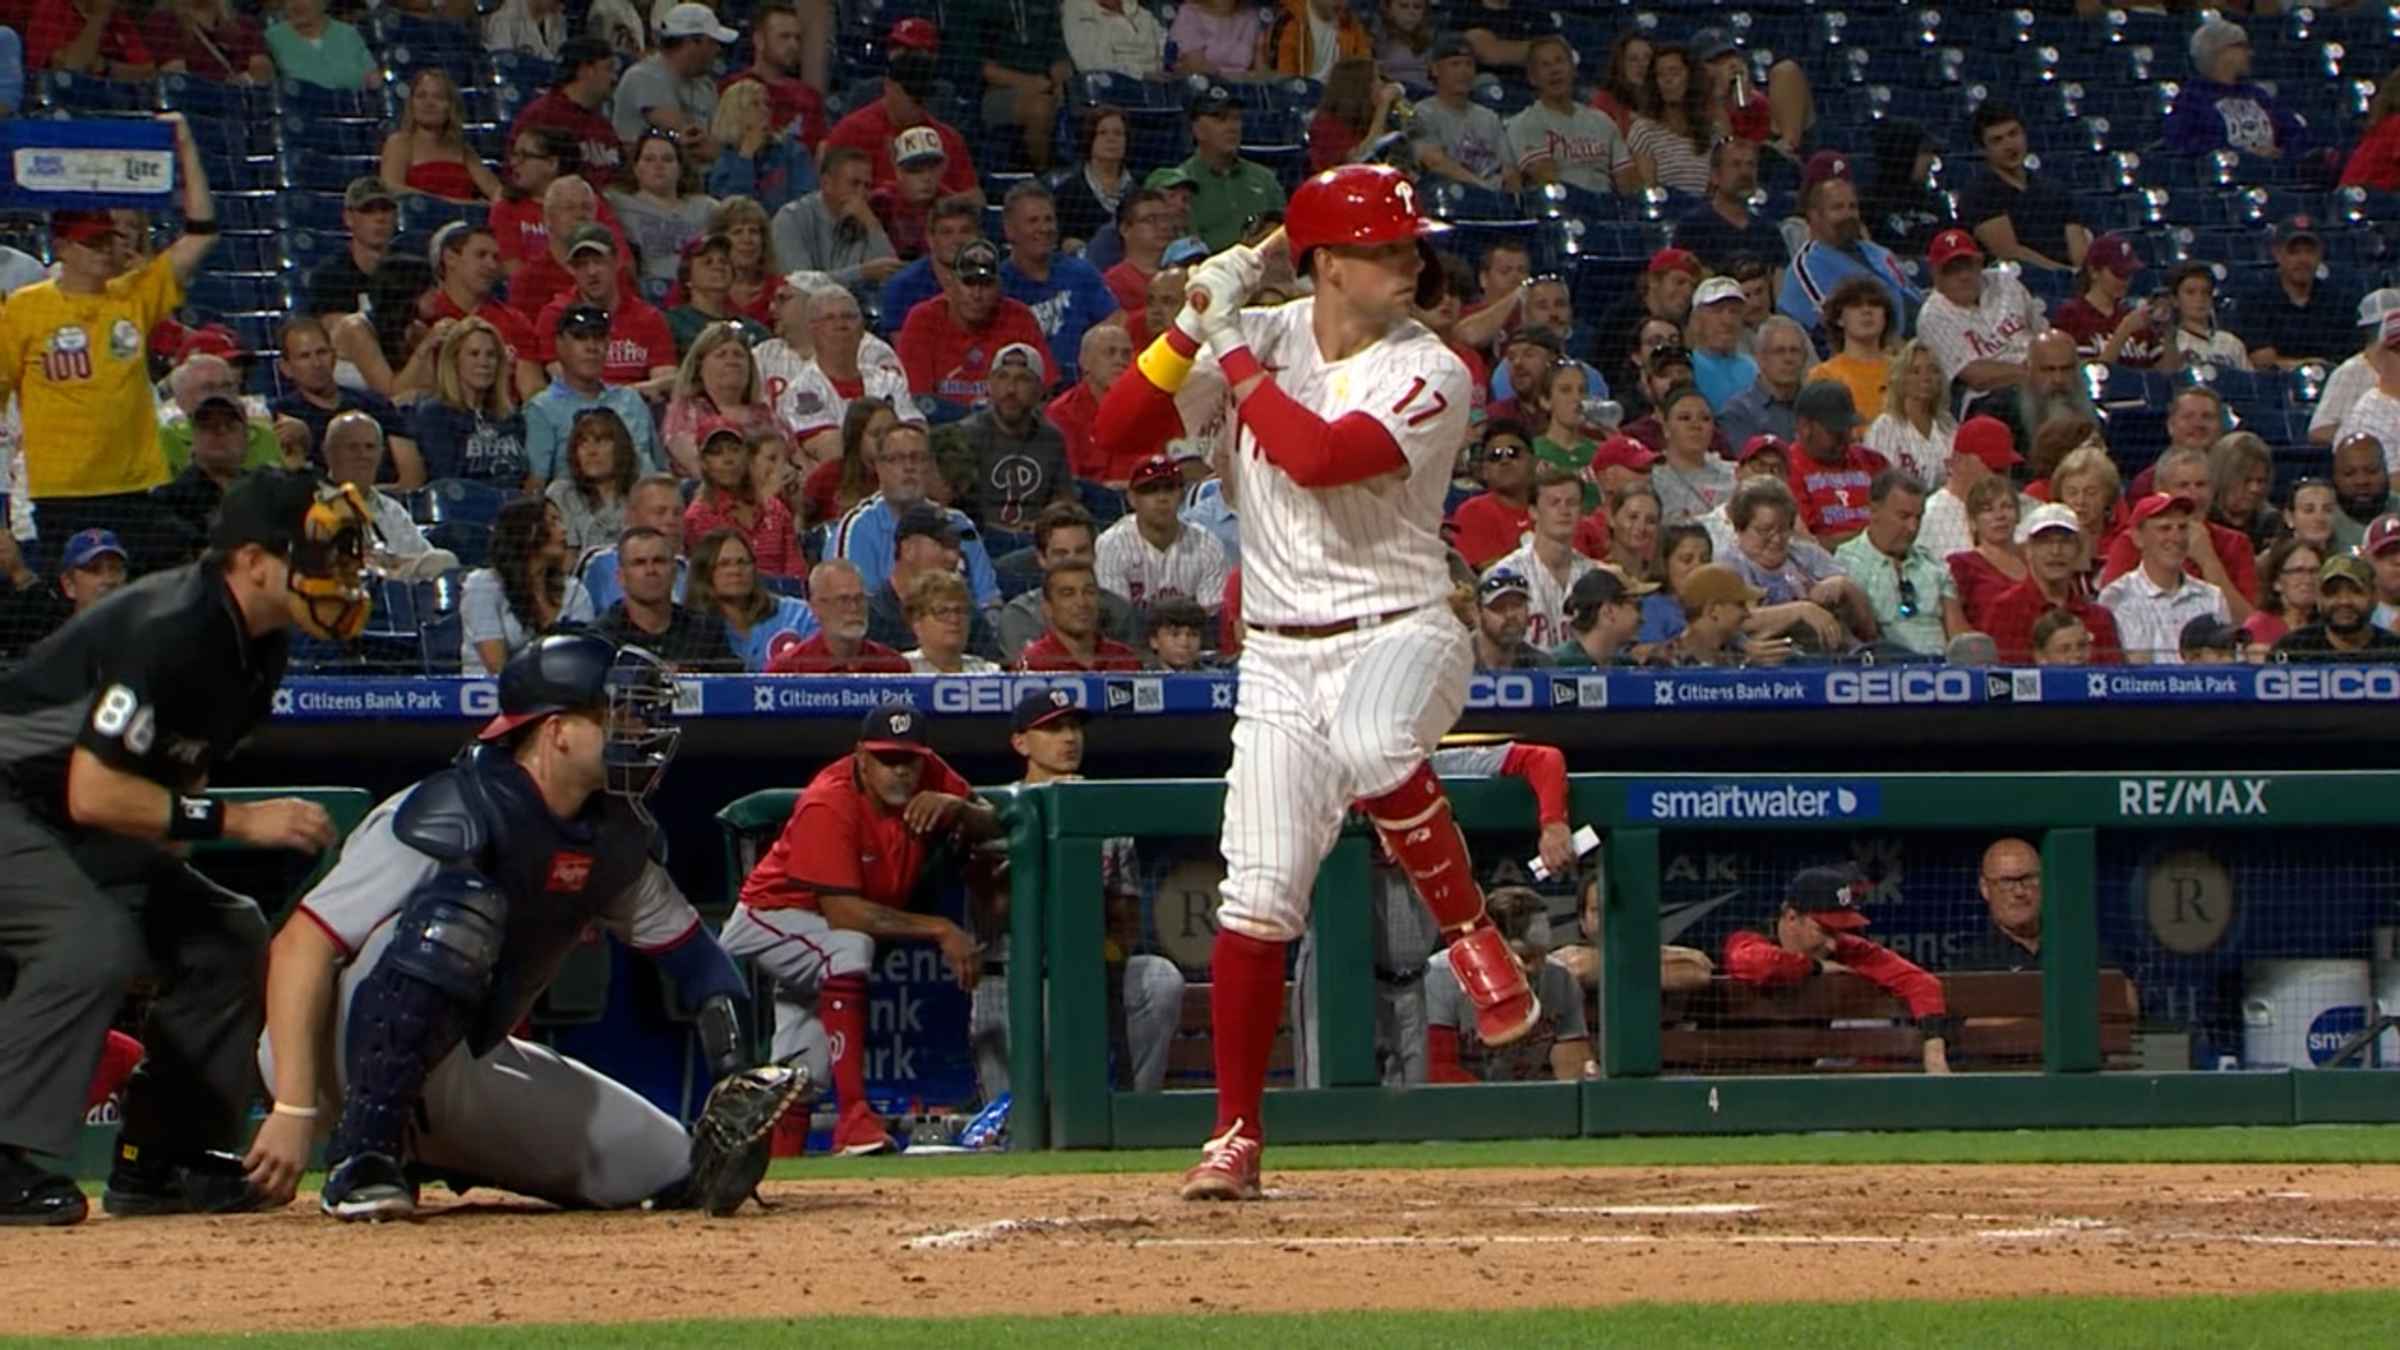 Rhys Hoskins hits homer after almost being drilled, while mic'd! 😱